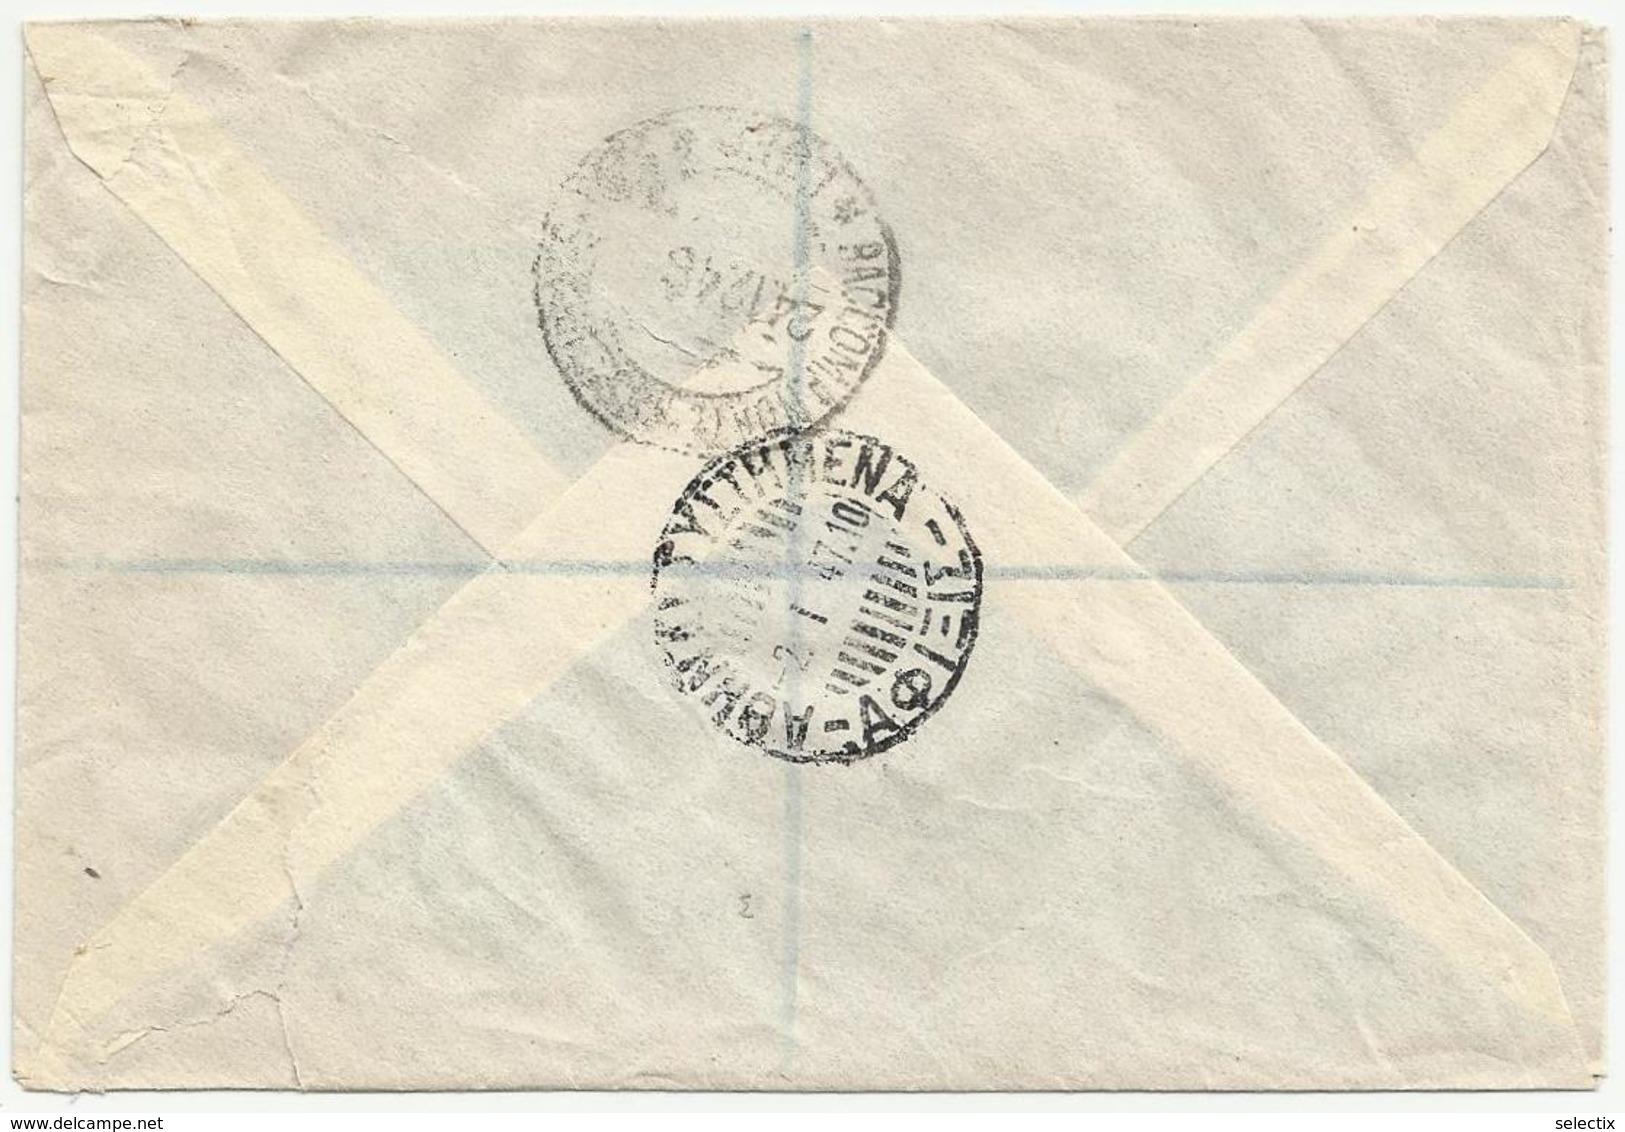 Greece 1946 Symi - British Occupation M.E.F. - Registered Cover - Dodecanese